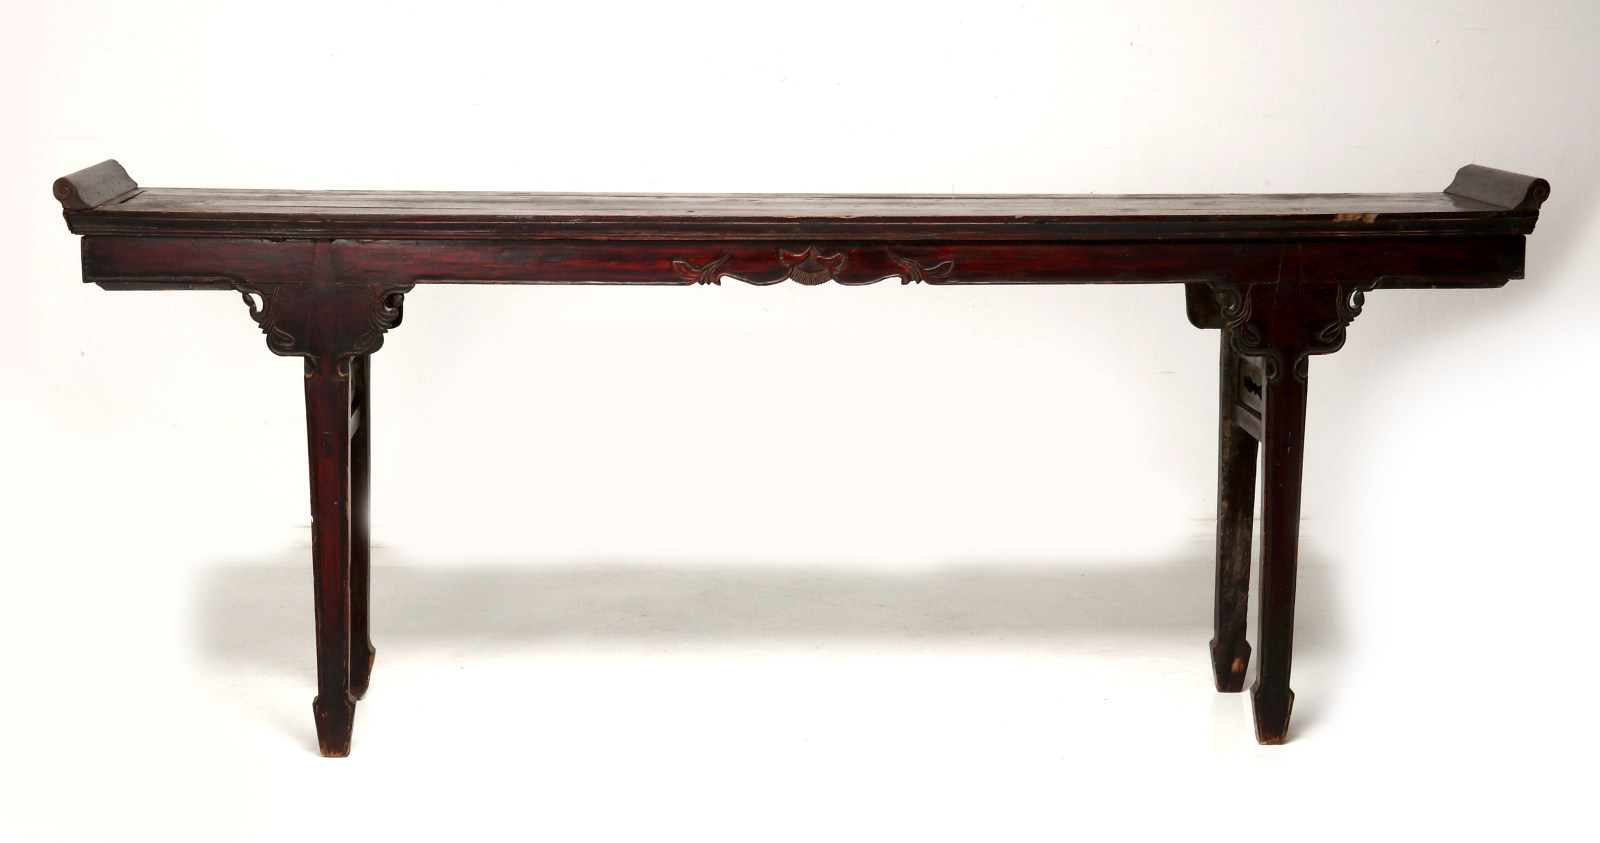 AN 18TH TO 19TH CENTURY CHINESE ALTAR TABLE